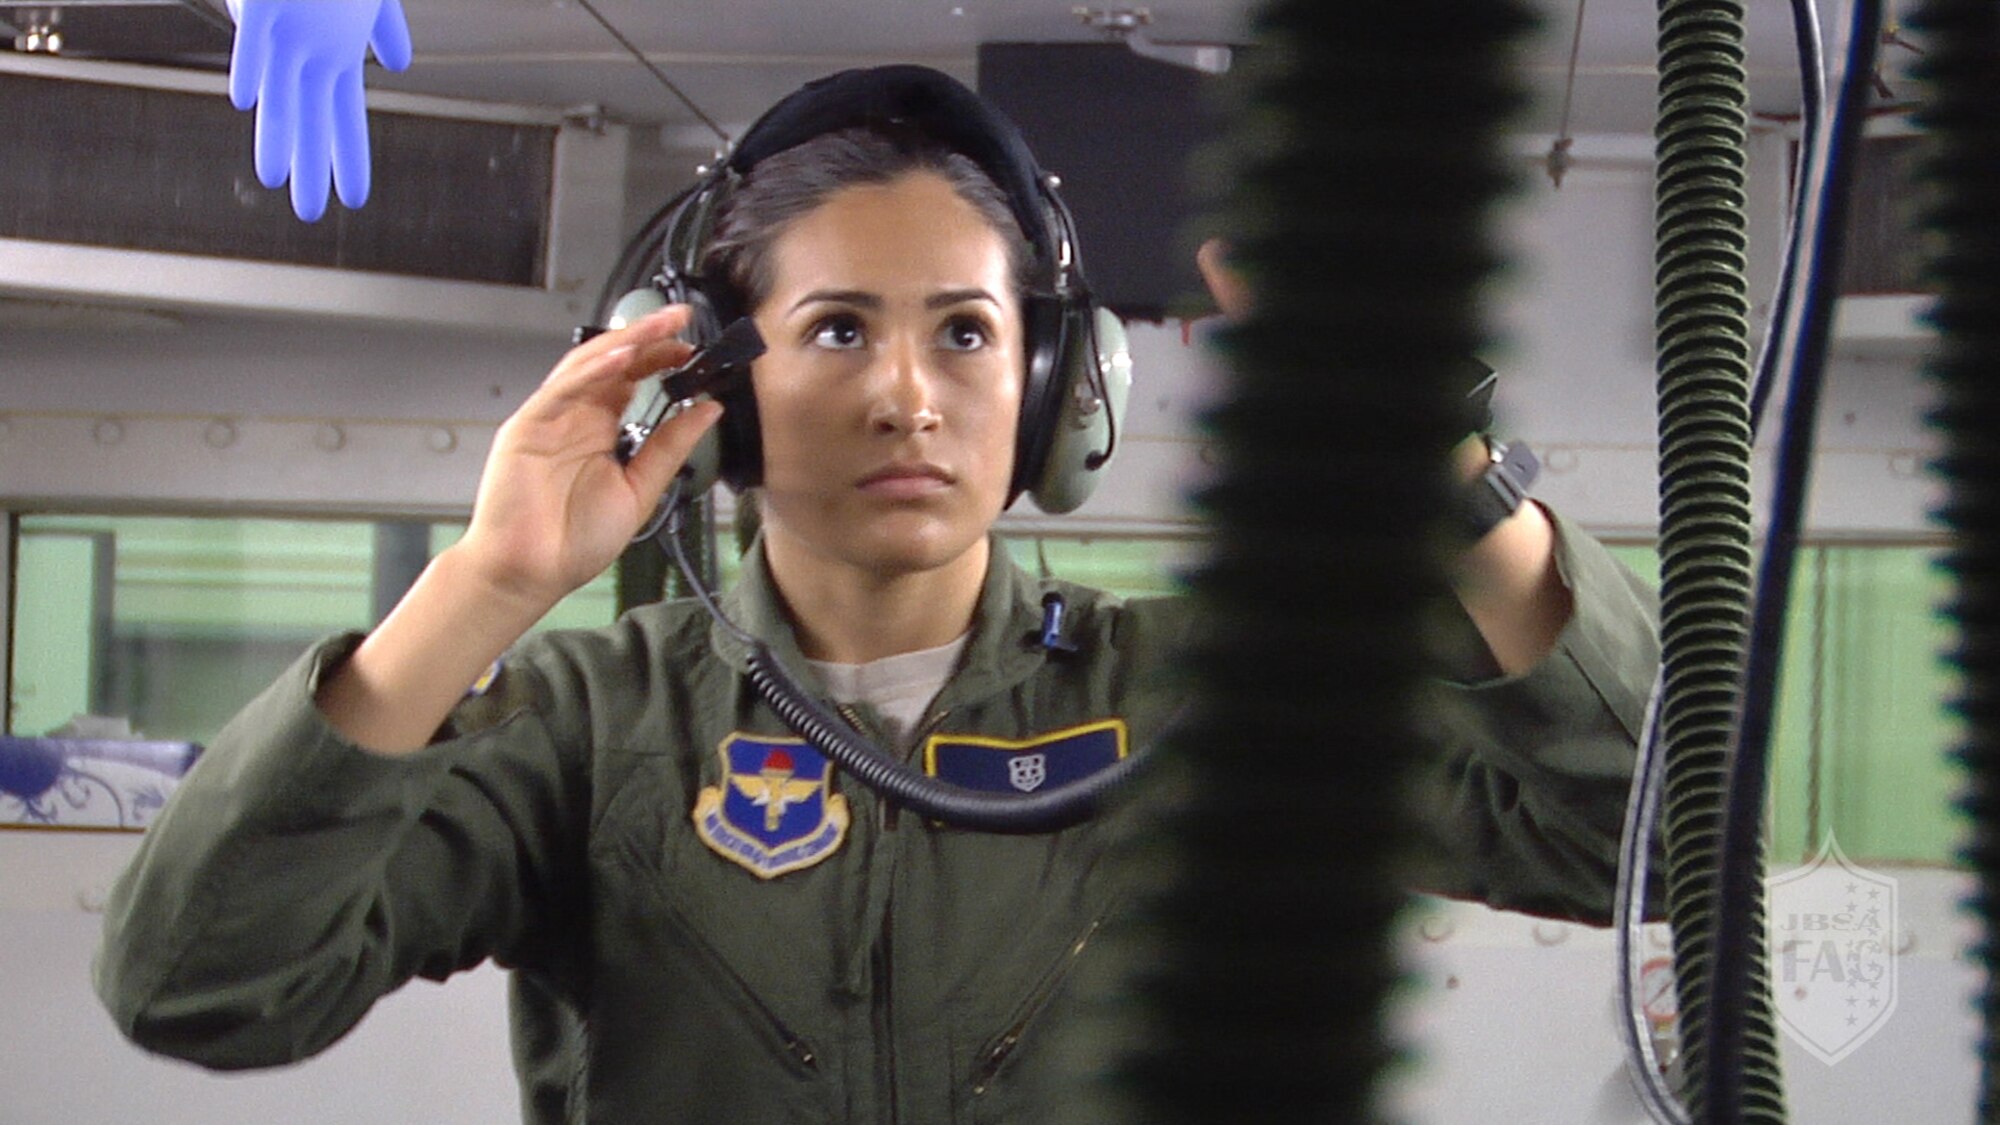 Airman 1st Class Ariana Rodriguez, 359th Aerospace Medicine Squadron aerospace and operational physiology flight technician, checks an oxygen regulator Aug. 6, 2015, at Joint Base San Antonio-Randolph. Rodriguez went to high school in Huntington Beach, California, and joined the Air Force in 2013.